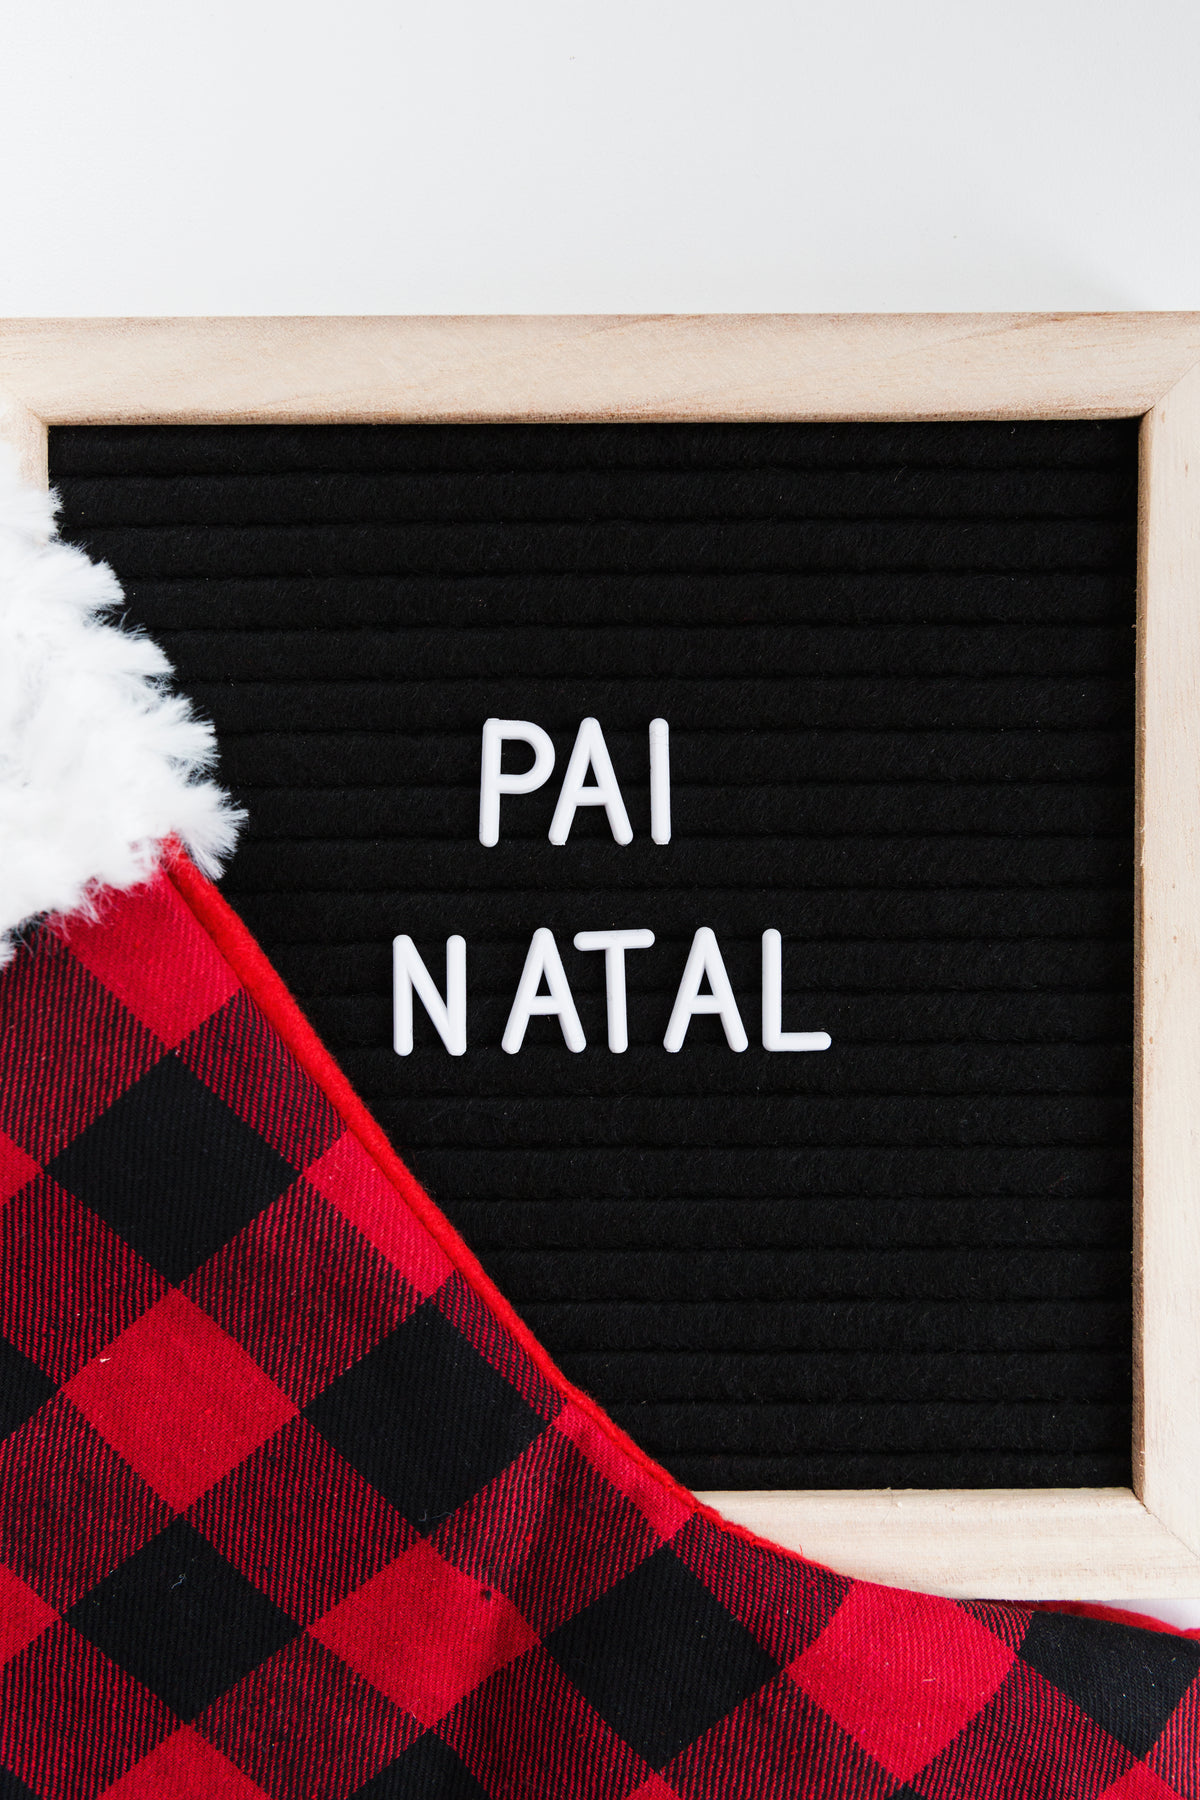 pai natal on letter board